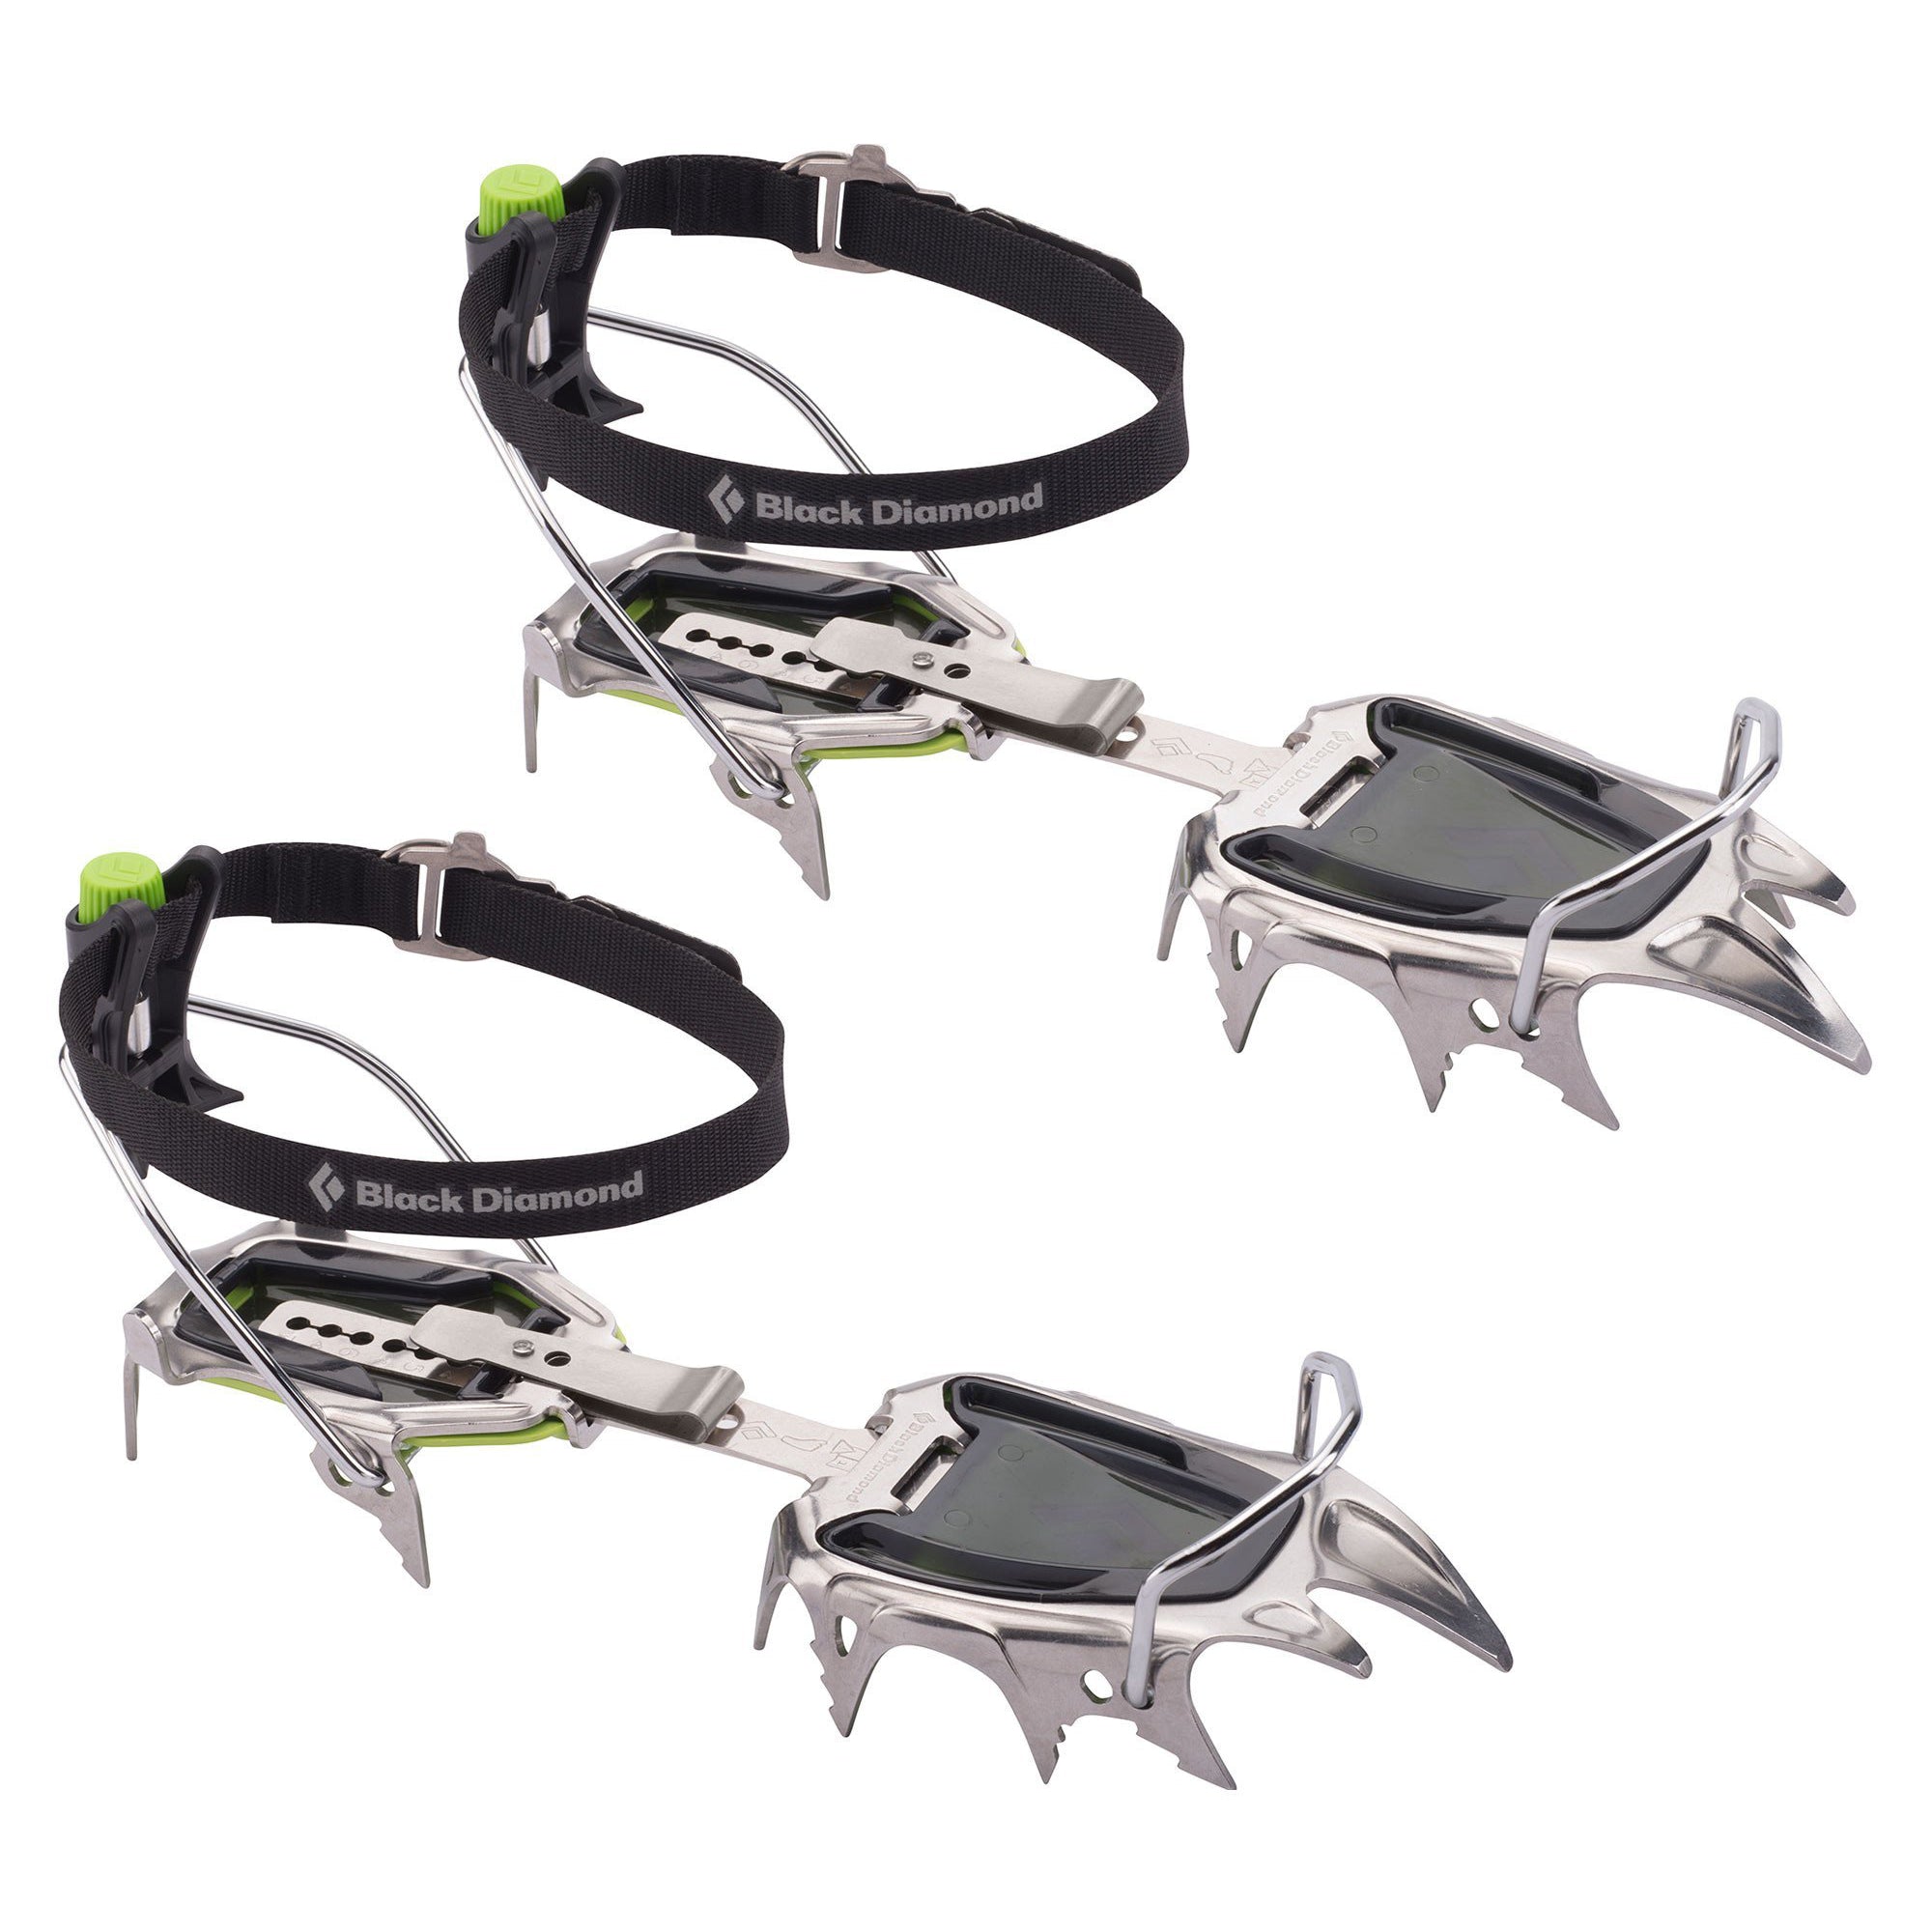 Pair of Black Diamond Snaggletooth Crampons, front/side view shown in black and silver colours